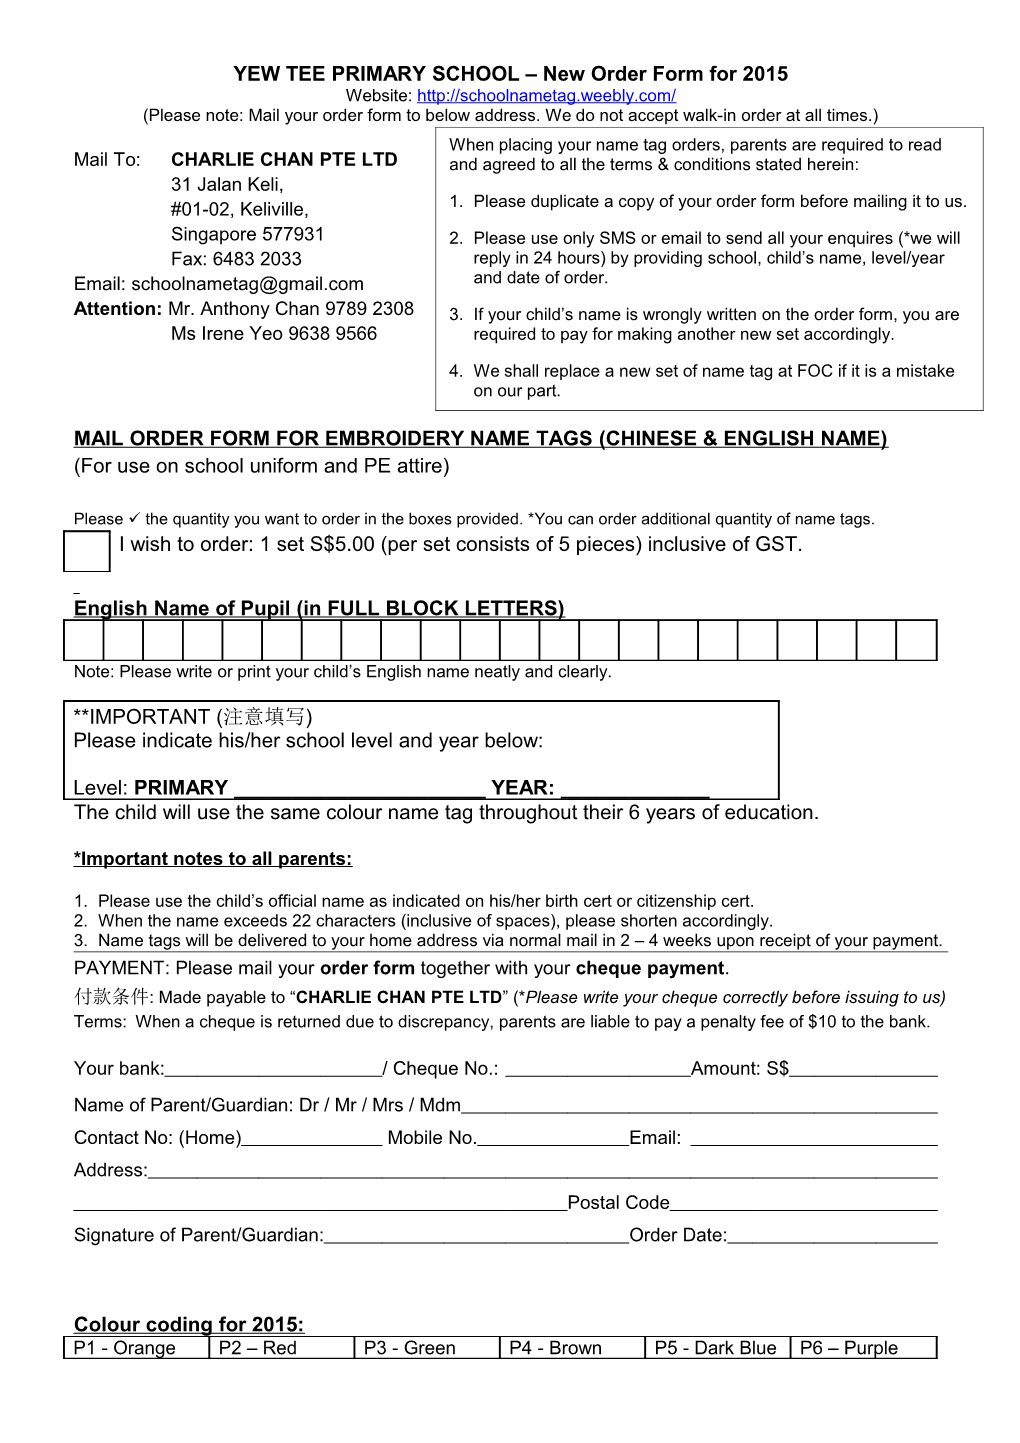 YEW TEE PRIMARY SCHOOL New Order Form for 2015